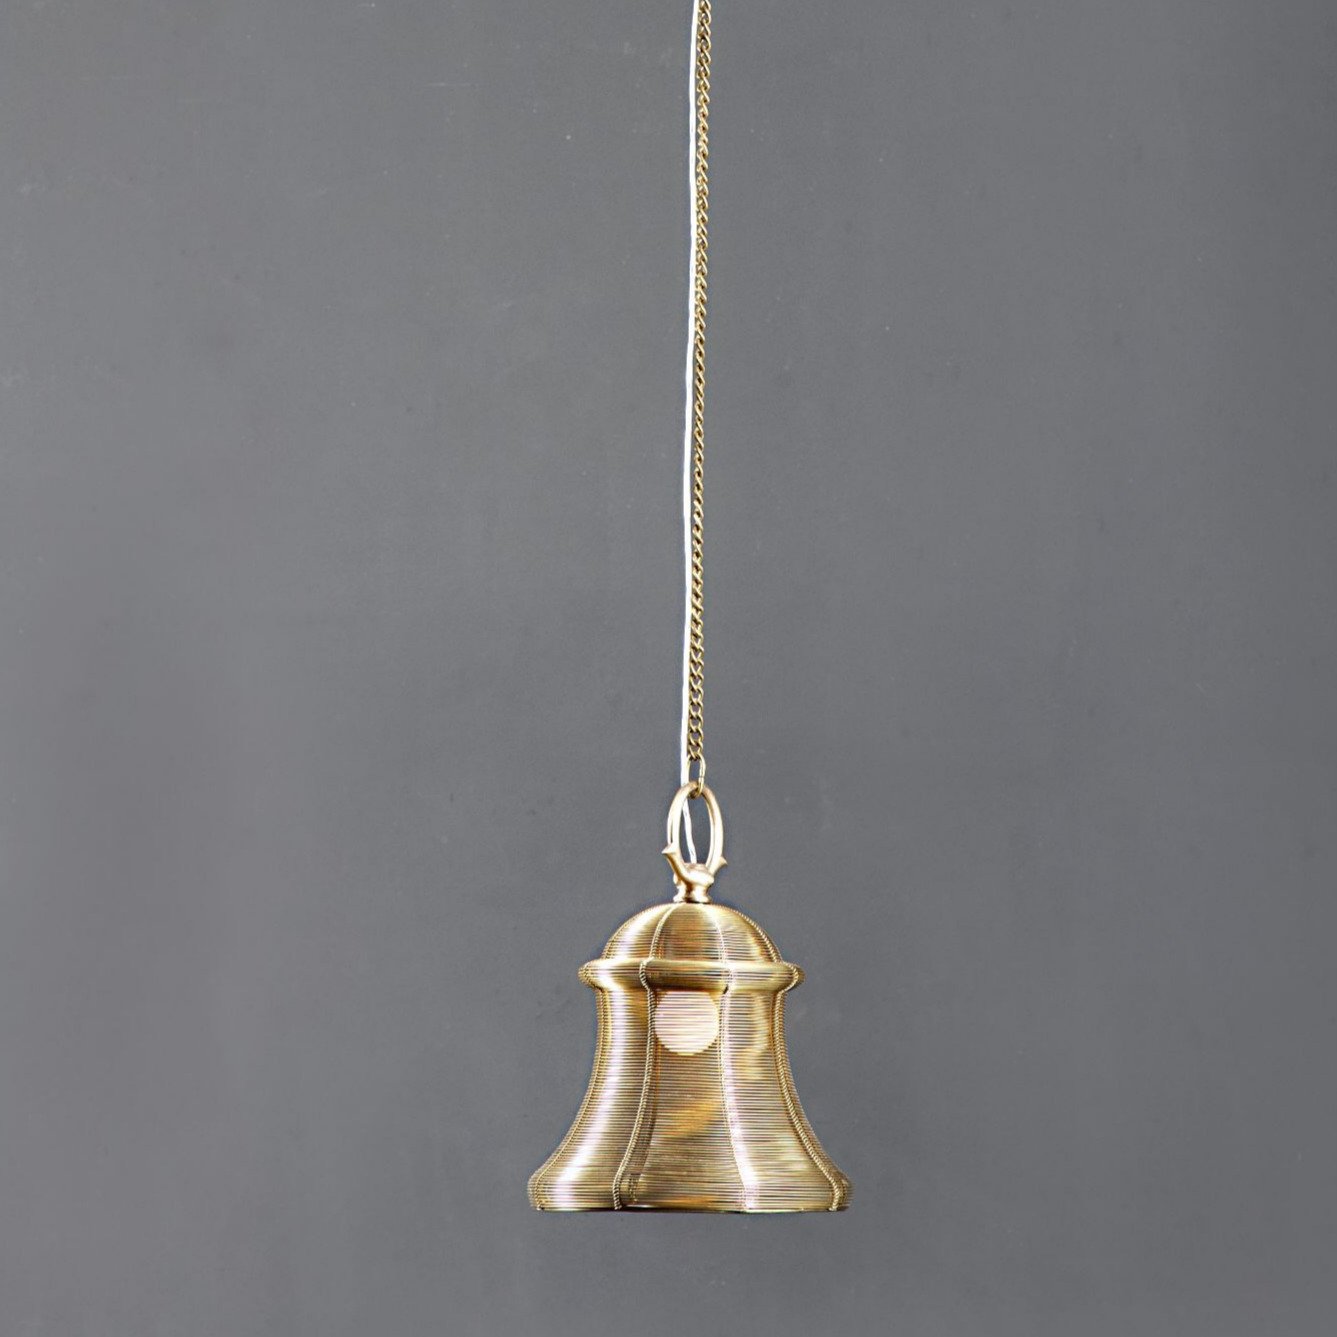 Wire bell lamp lighting wall ceiling hanging pendant brass, hanging lamp, ancient vintage lamp, unique hanging lamp